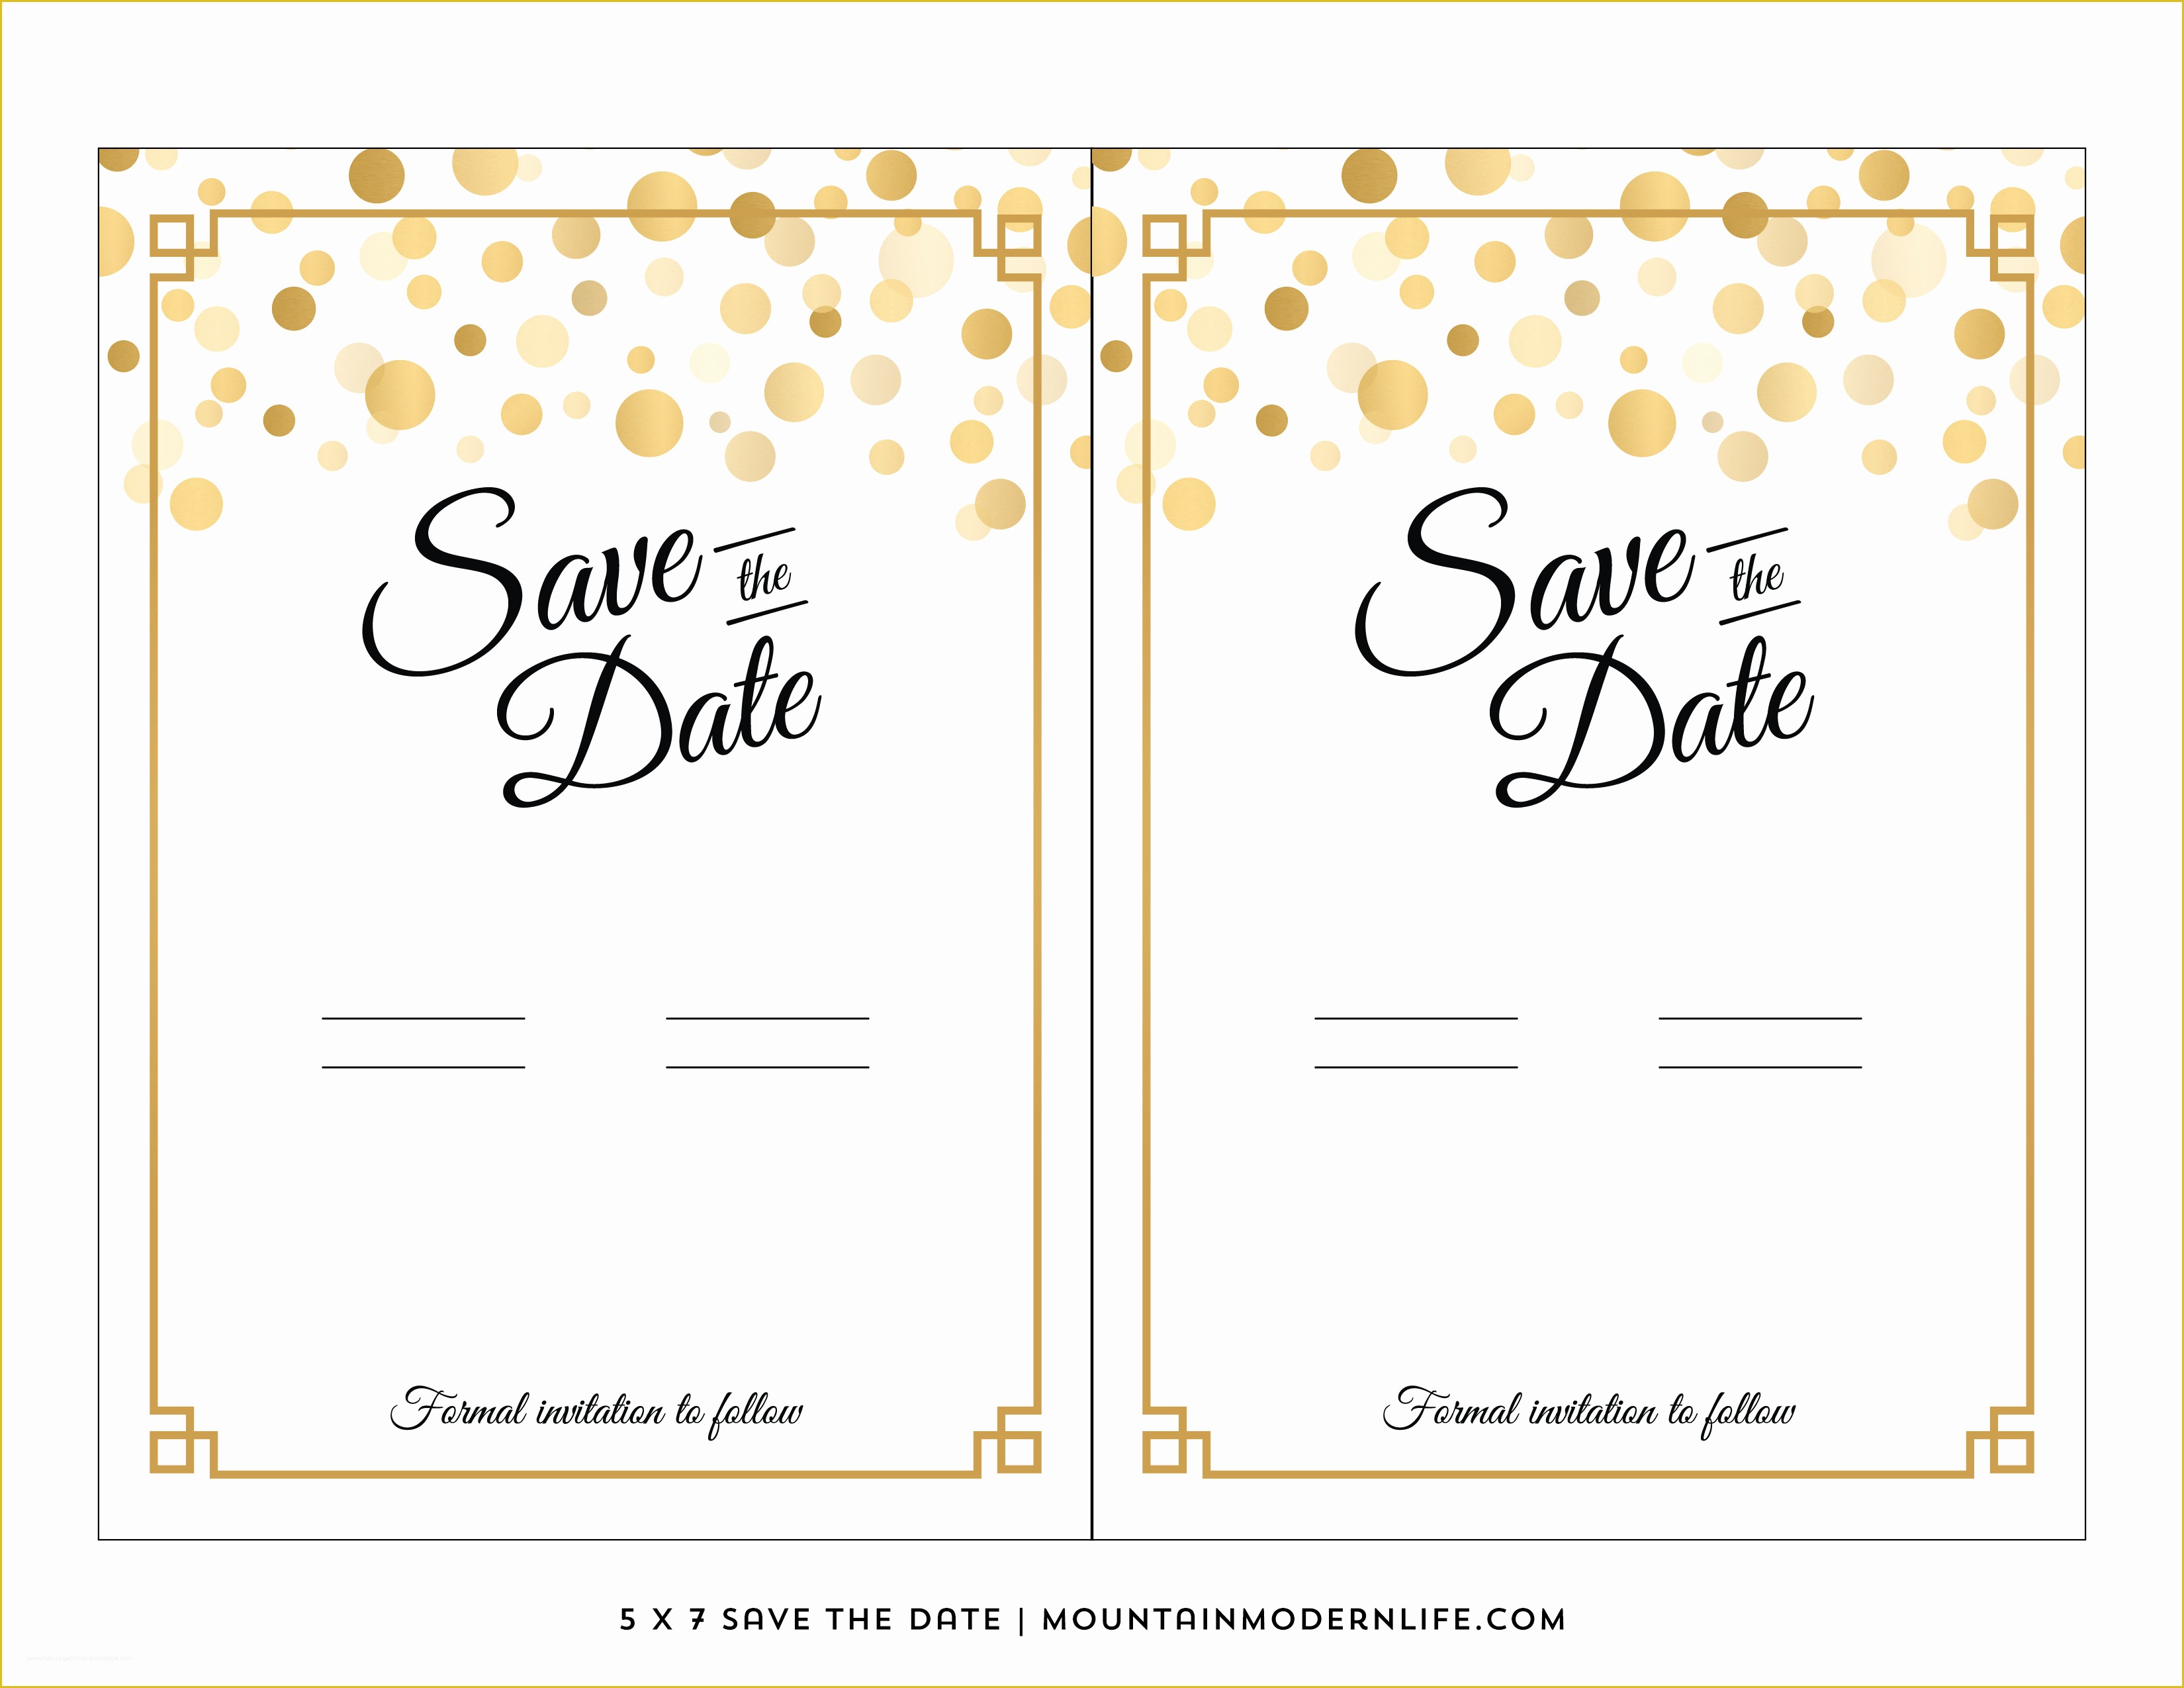 Free Save the Date Templates Of Template Free Templates Save the Date Template Save the